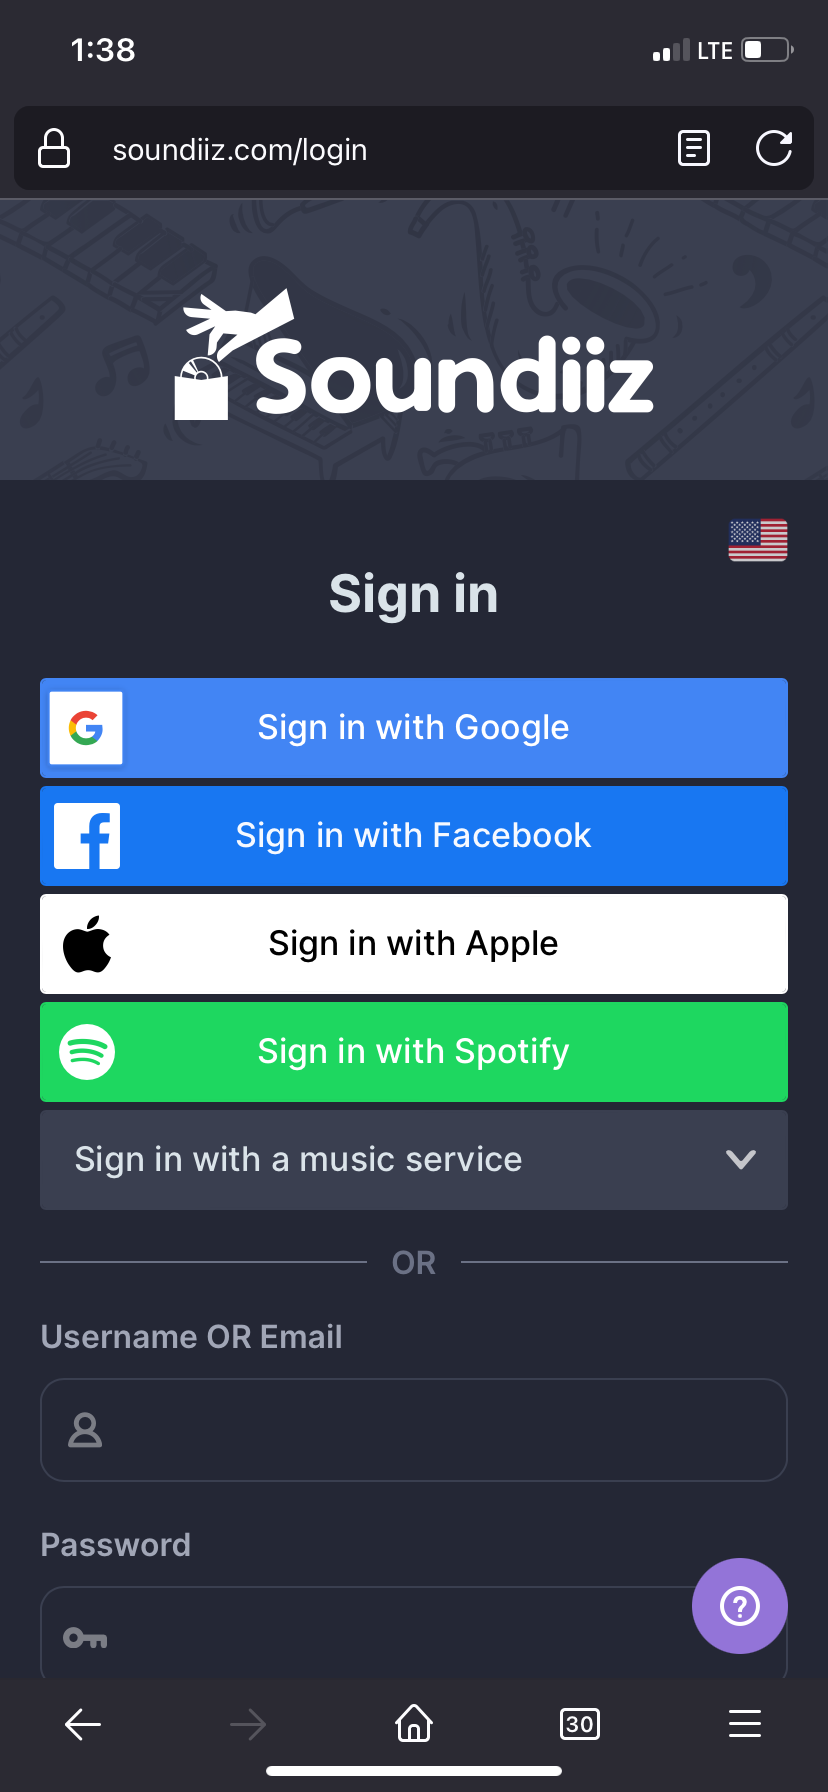 A screenshot of the sign-in page for Soundiiz.